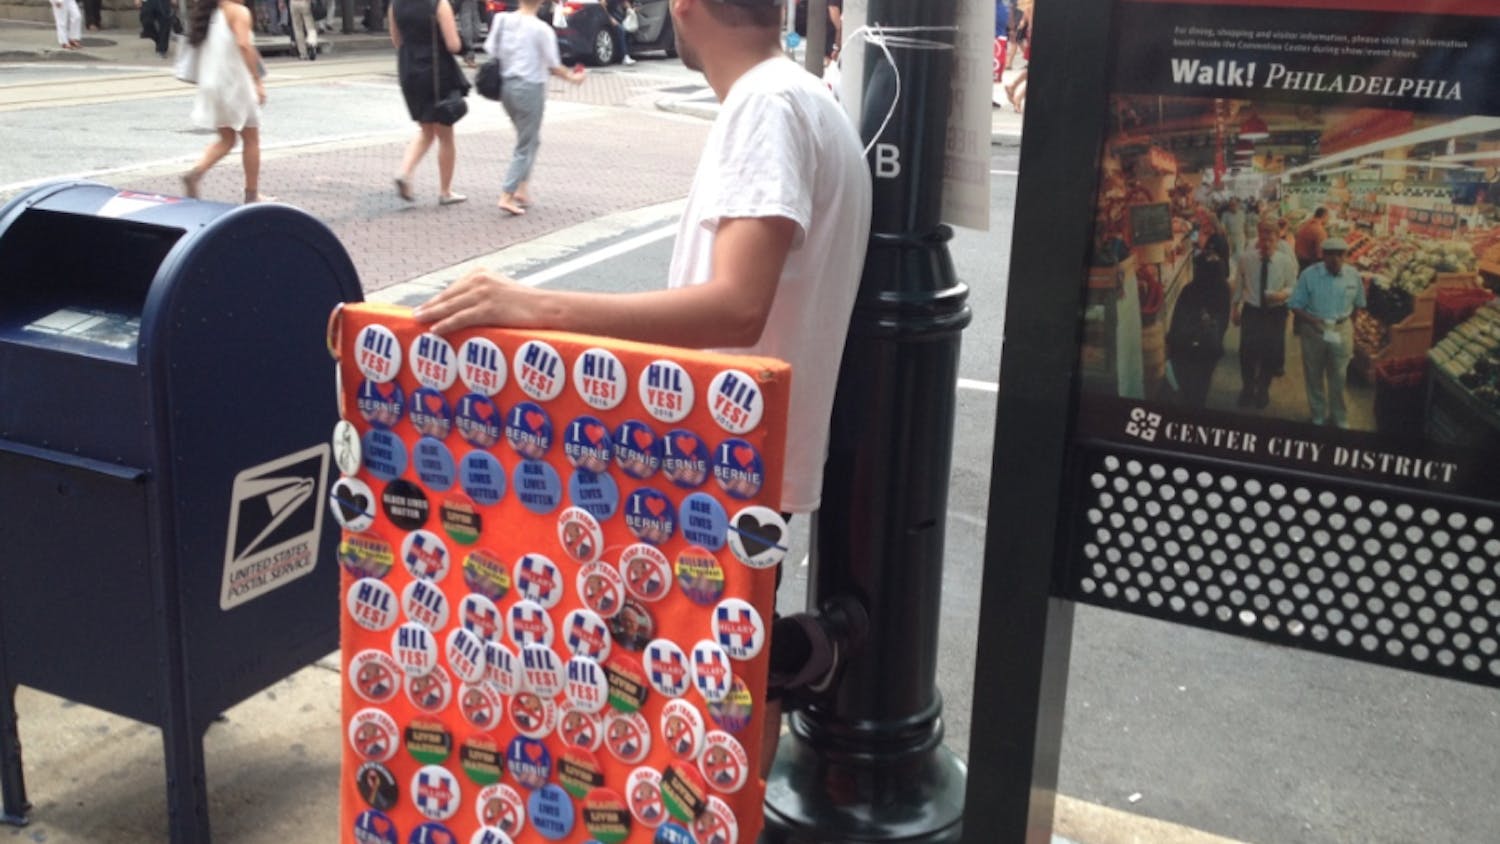 A vendor sells campaign buttons outside the Democratic National Convention in Philadelphia on July 28, 2016.